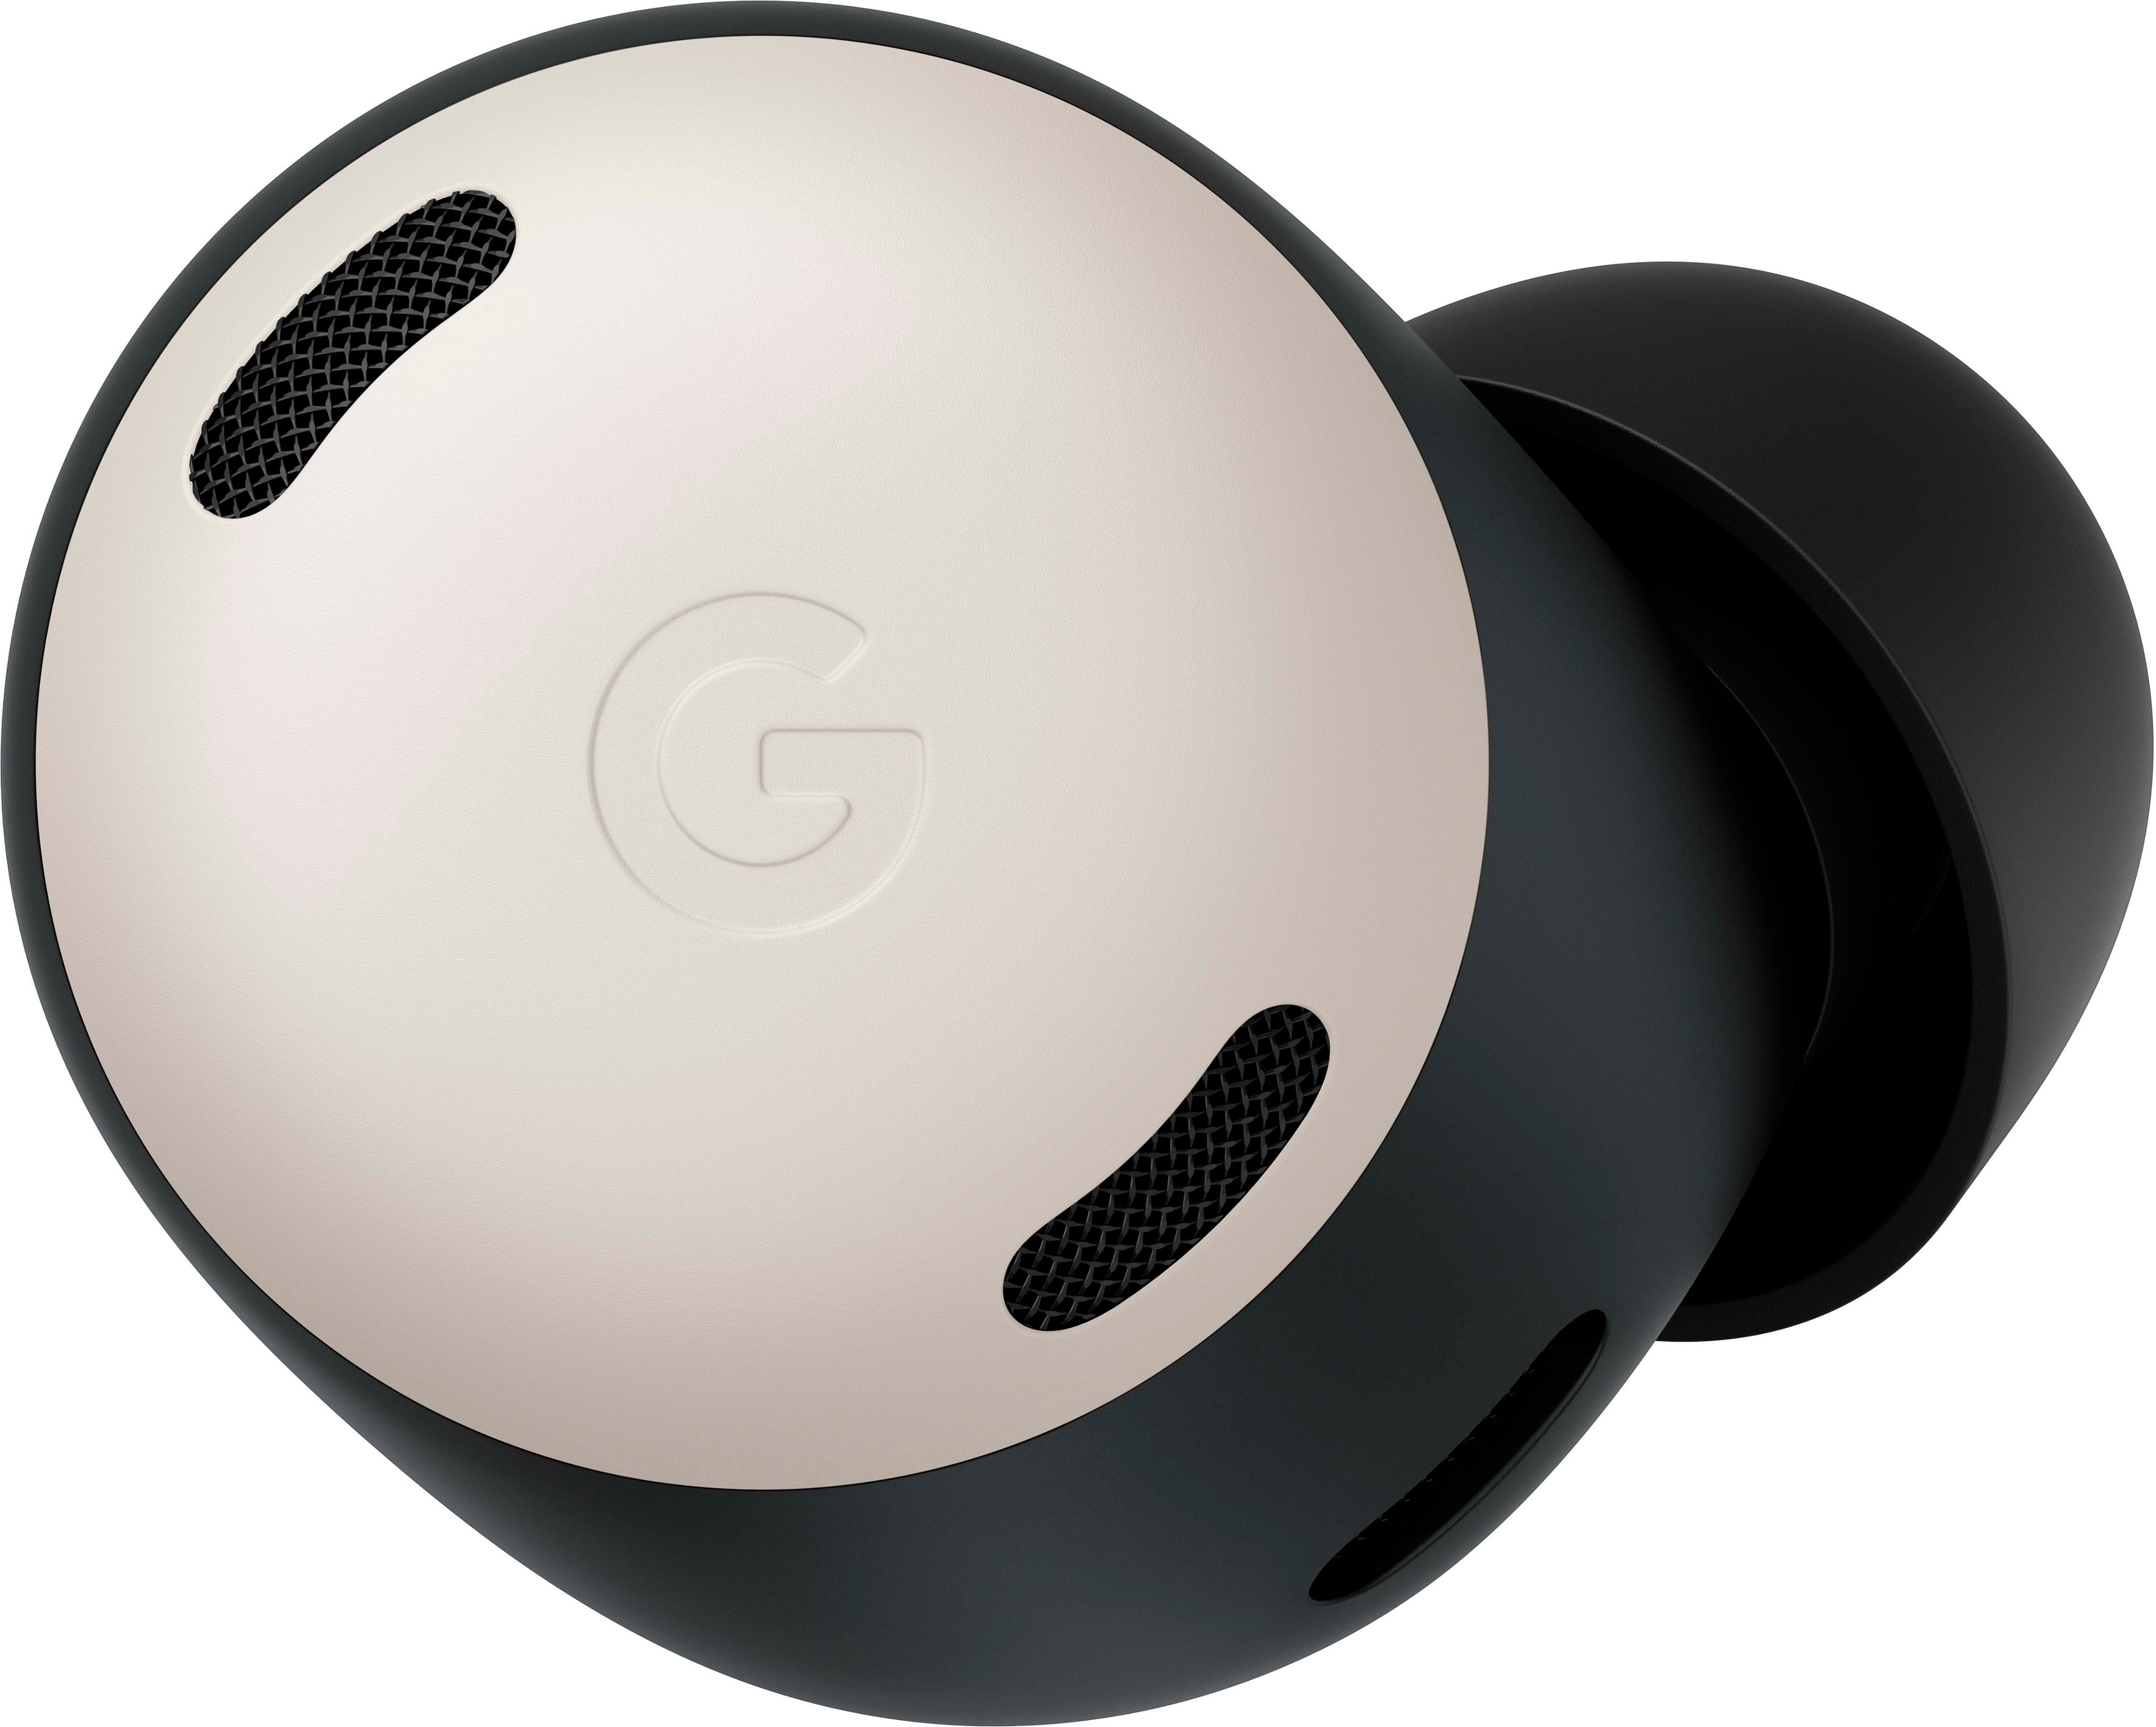 These are the new Pixel Buds Pro by Google - 9to5Google